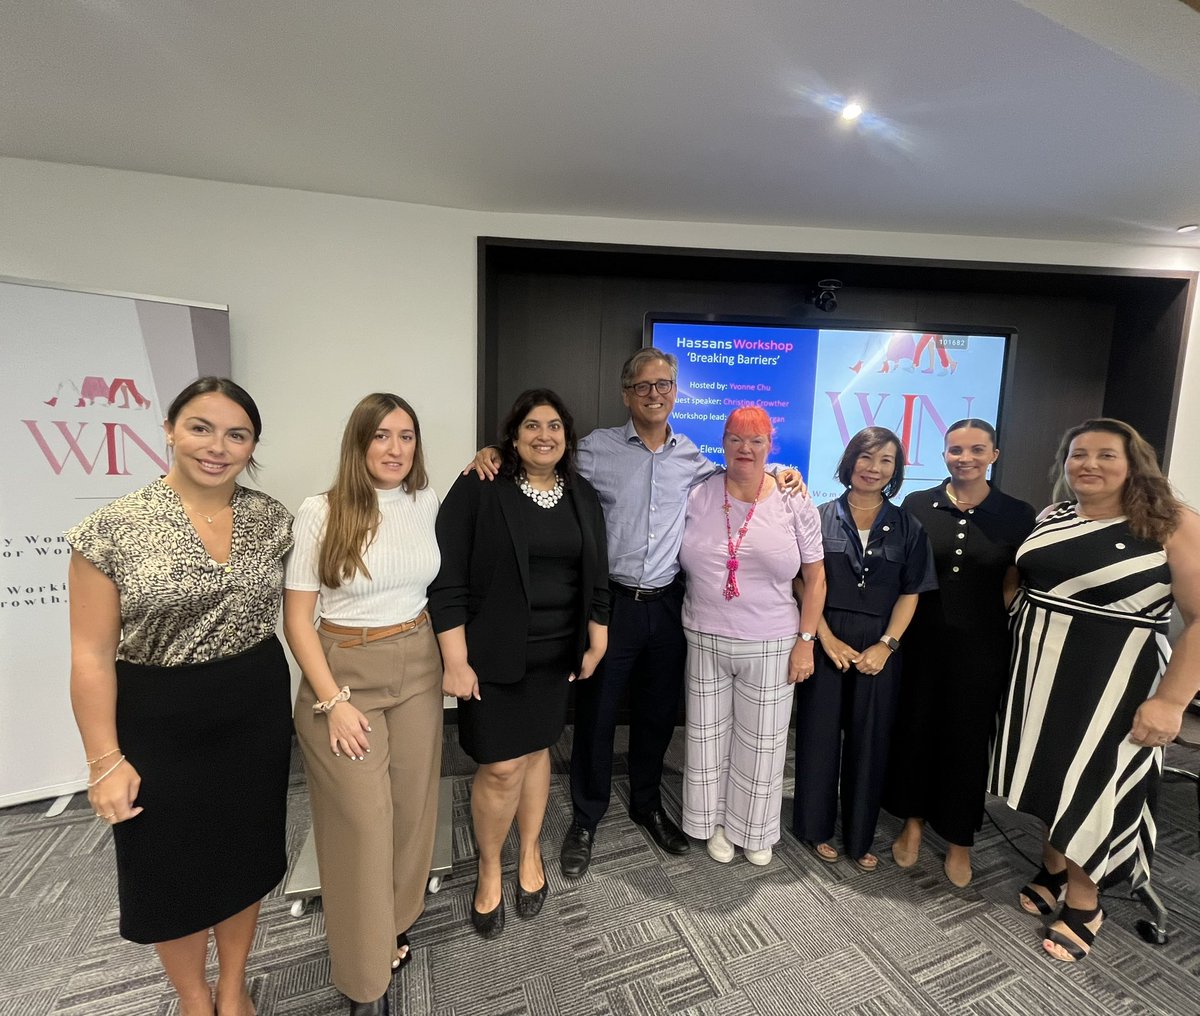 Fantastic ‘Breaking Barriers’ workshop aimed at women in insurance #gibraltar held at our offices this am, hosted by @Run_YSTChu, Kathryn Morgan and guest speaker Christine Crowther, thanks to @NigelMFeetham for popping in to welcome the delegates views.gibraltarlaw.com/post/102ioo1/w…